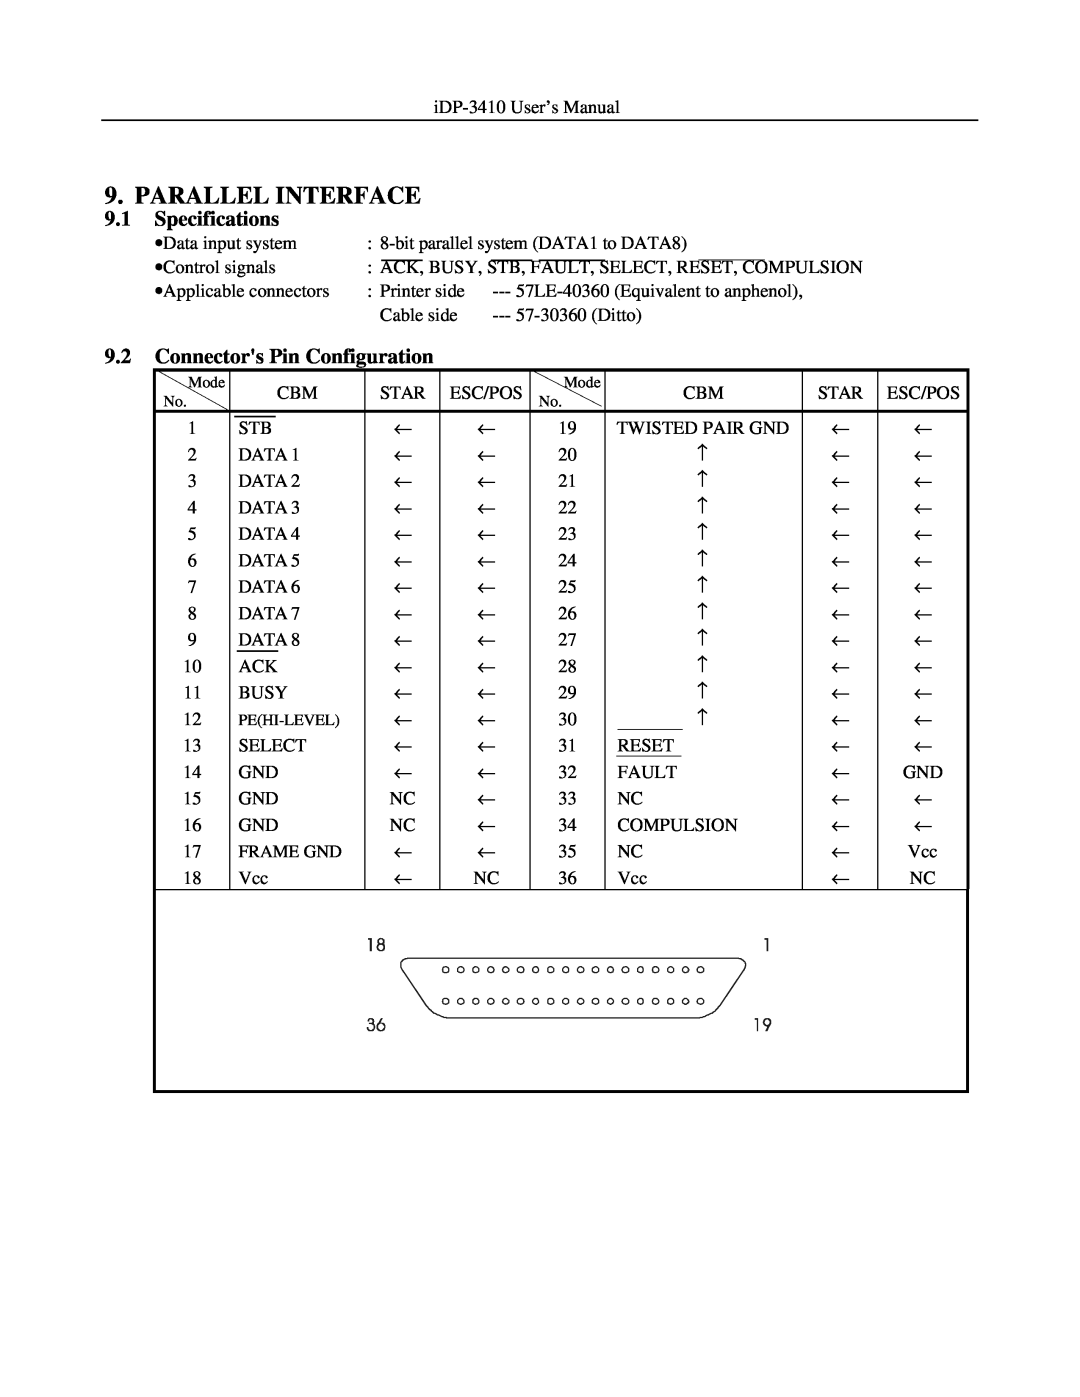 Addlogix iDP-3410 user manual Parallel Interface, Specifications, Connectors Pin Configuration 